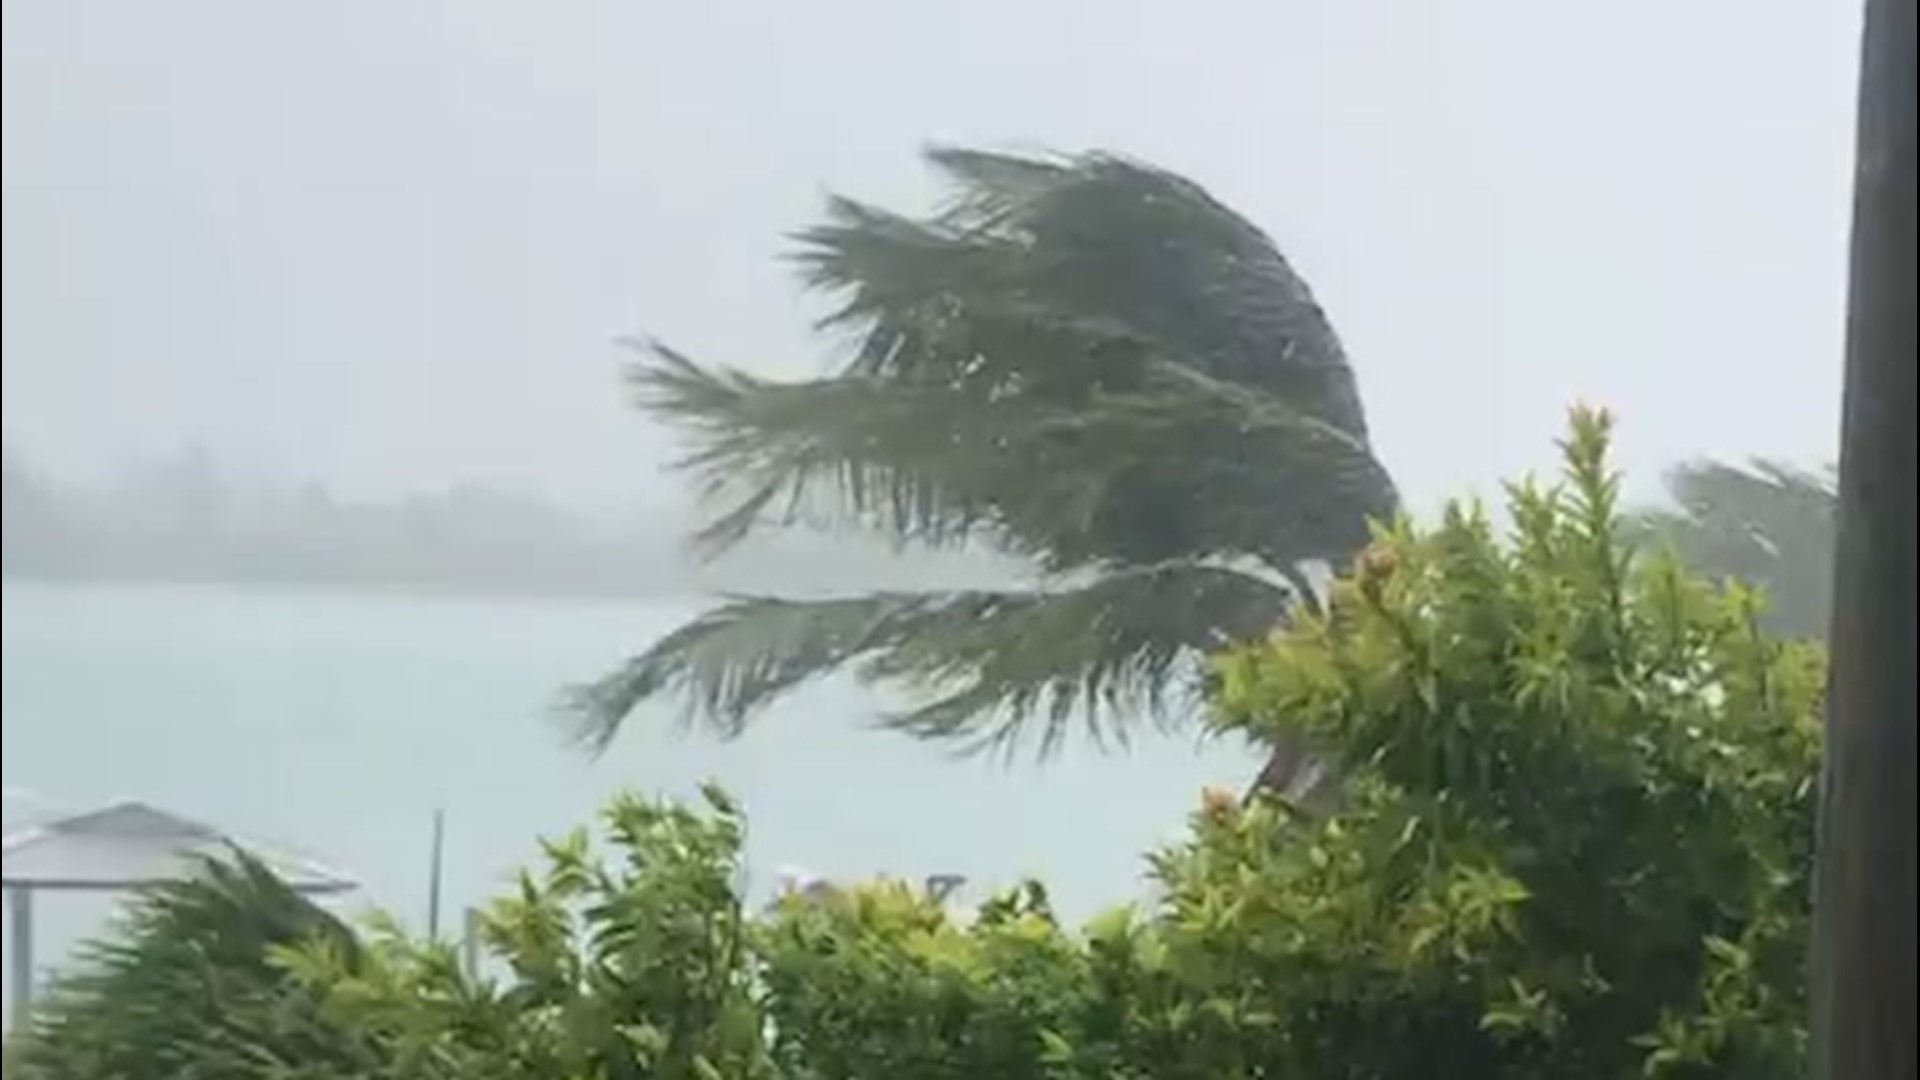 Isaias whipped through the Bahamas on Aug. 1, with fierce winds and heavy rainfall. In this video in Andros, trees are seen bending to the force of the winds.